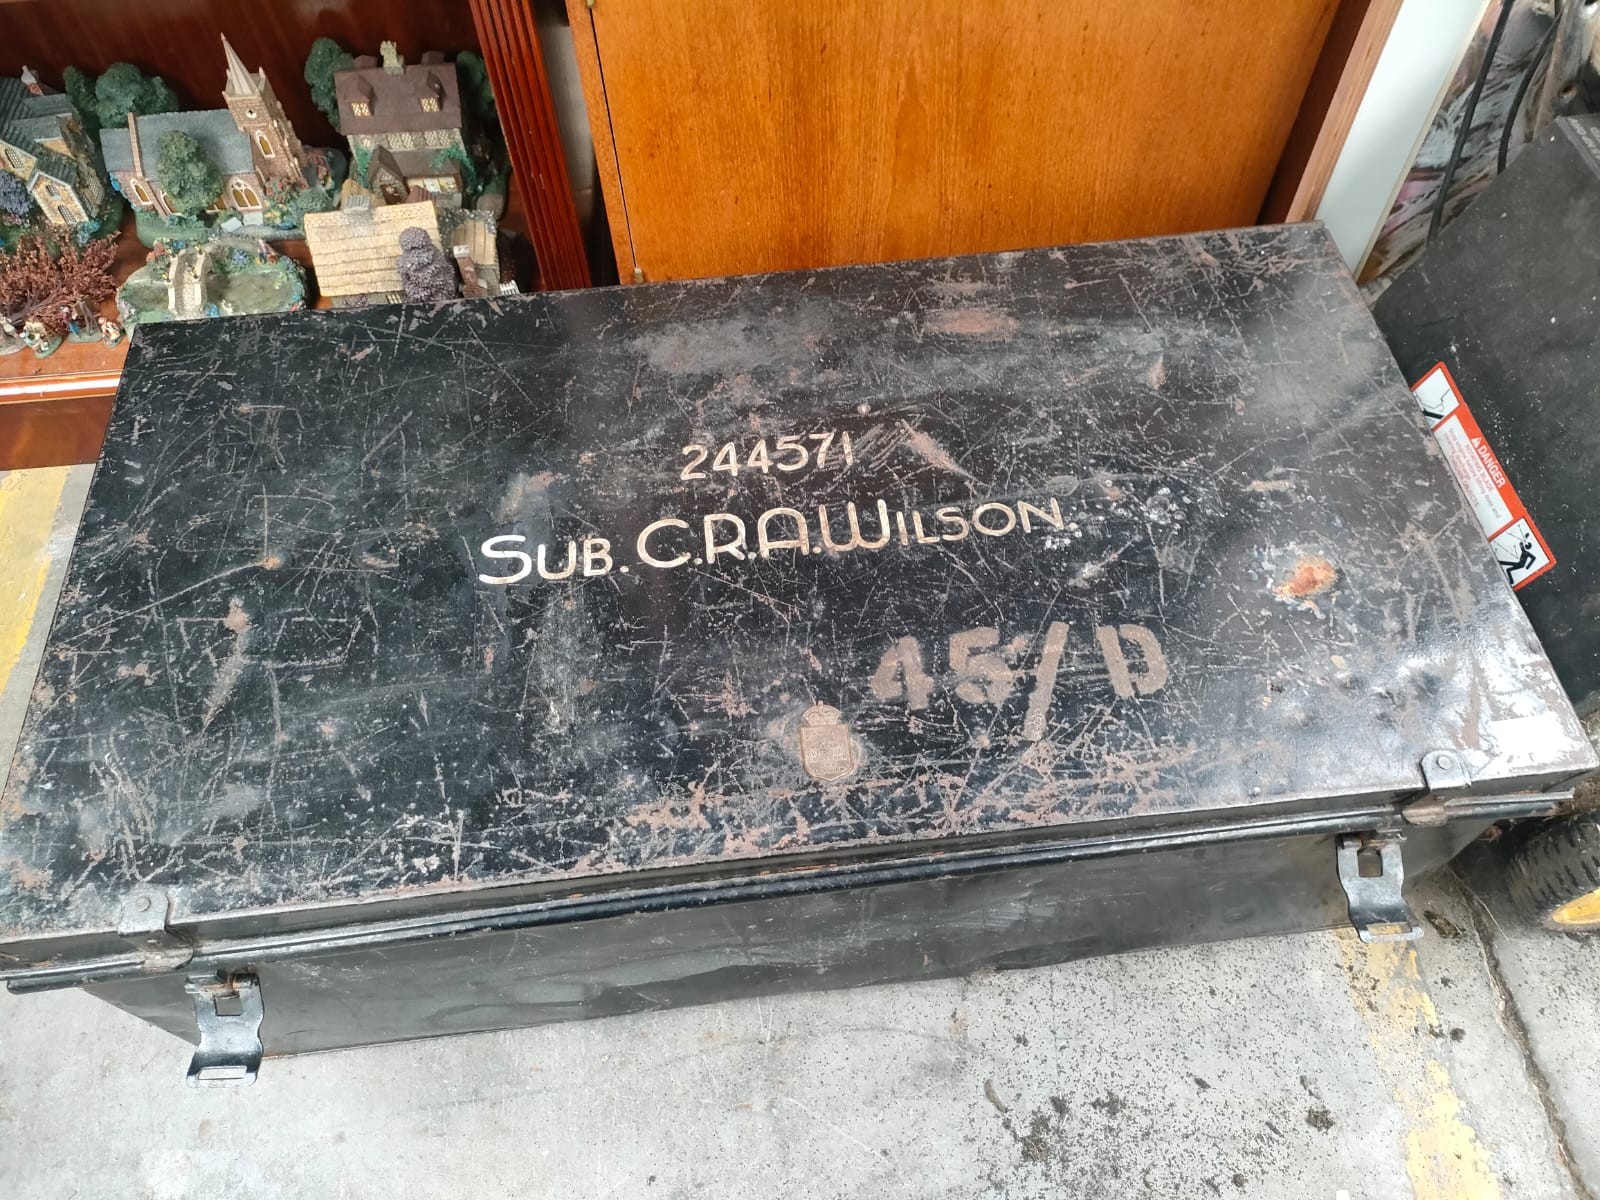 A Military submarine trunk with military connections